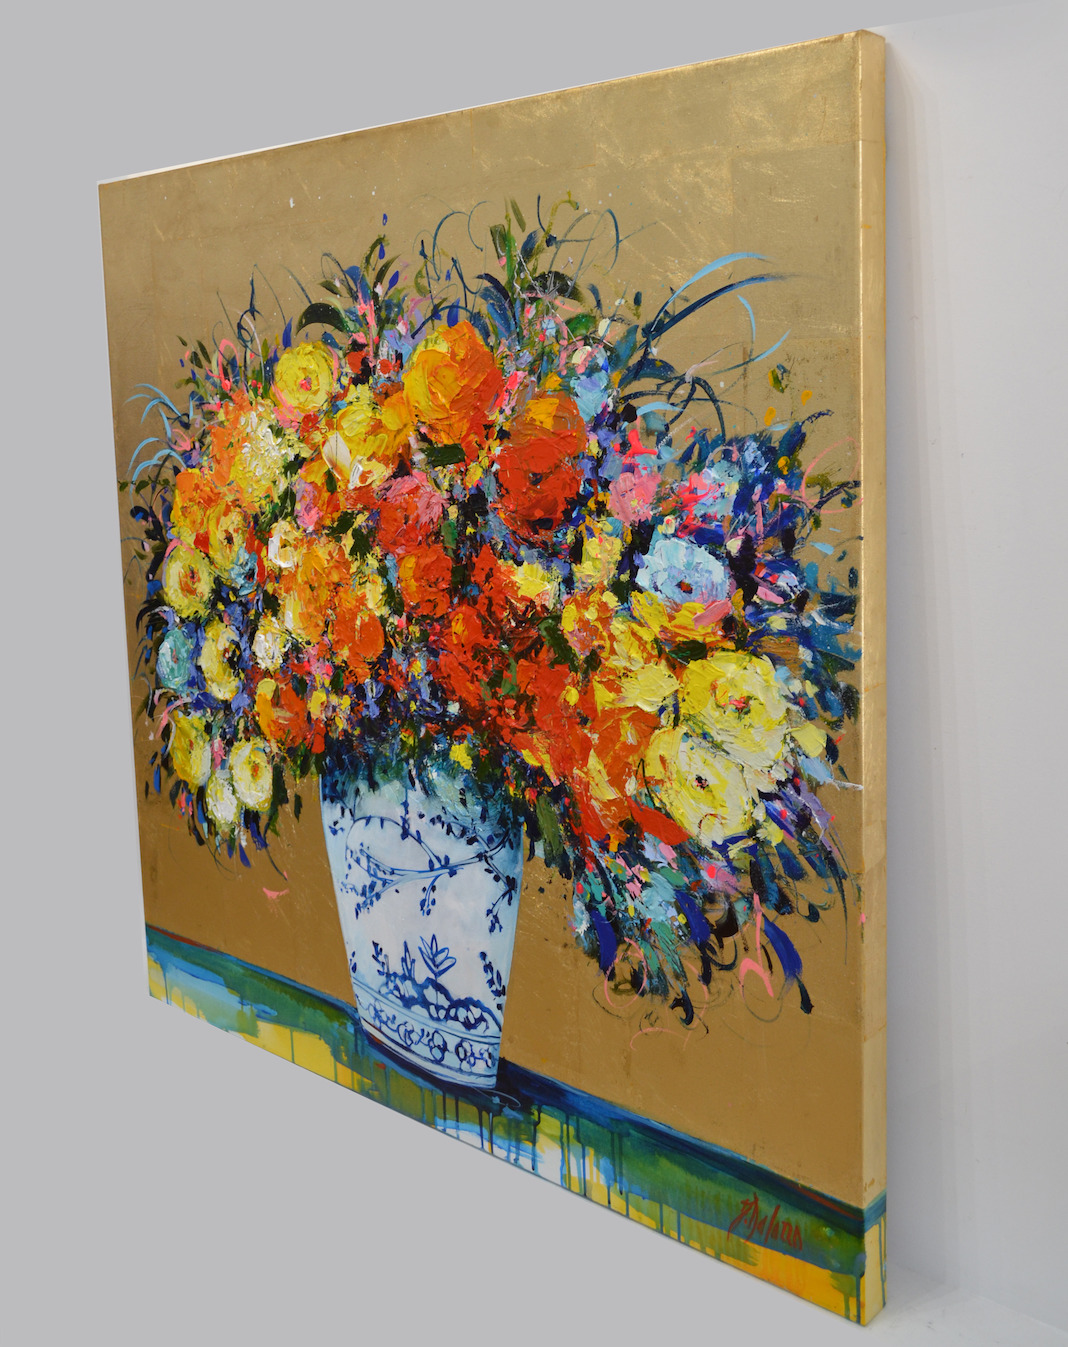 Side View Of Still Life Painting "Bouquet D'Abondance" By Judith Dalozzo